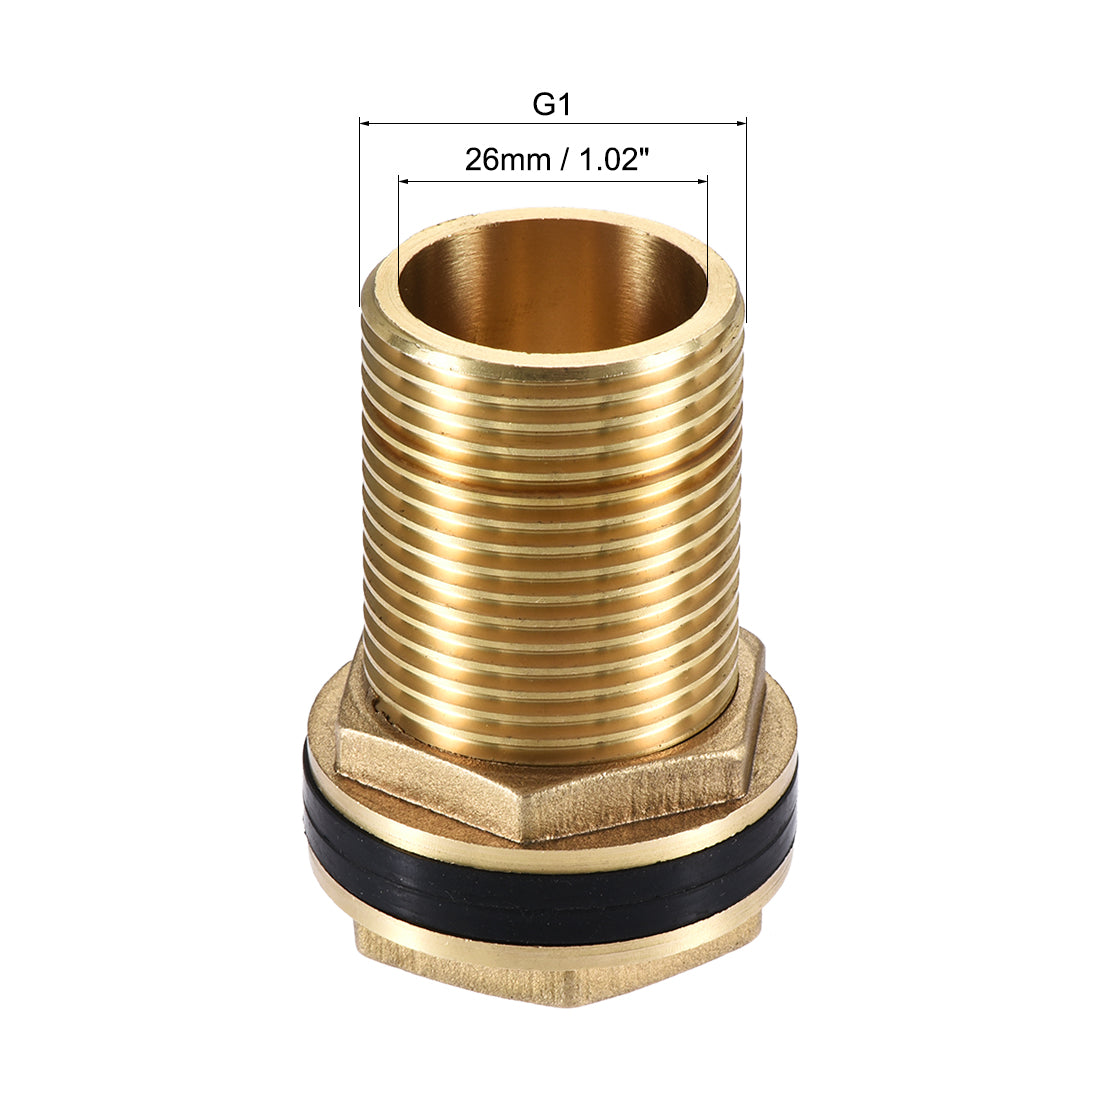 Uxcell Uxcell Bulkhead Fitting, G1/2 Male, Tube Adaptor Hose Fitting, with Silicone Gaskets, for Water Tanks, Brass, Gold Tone